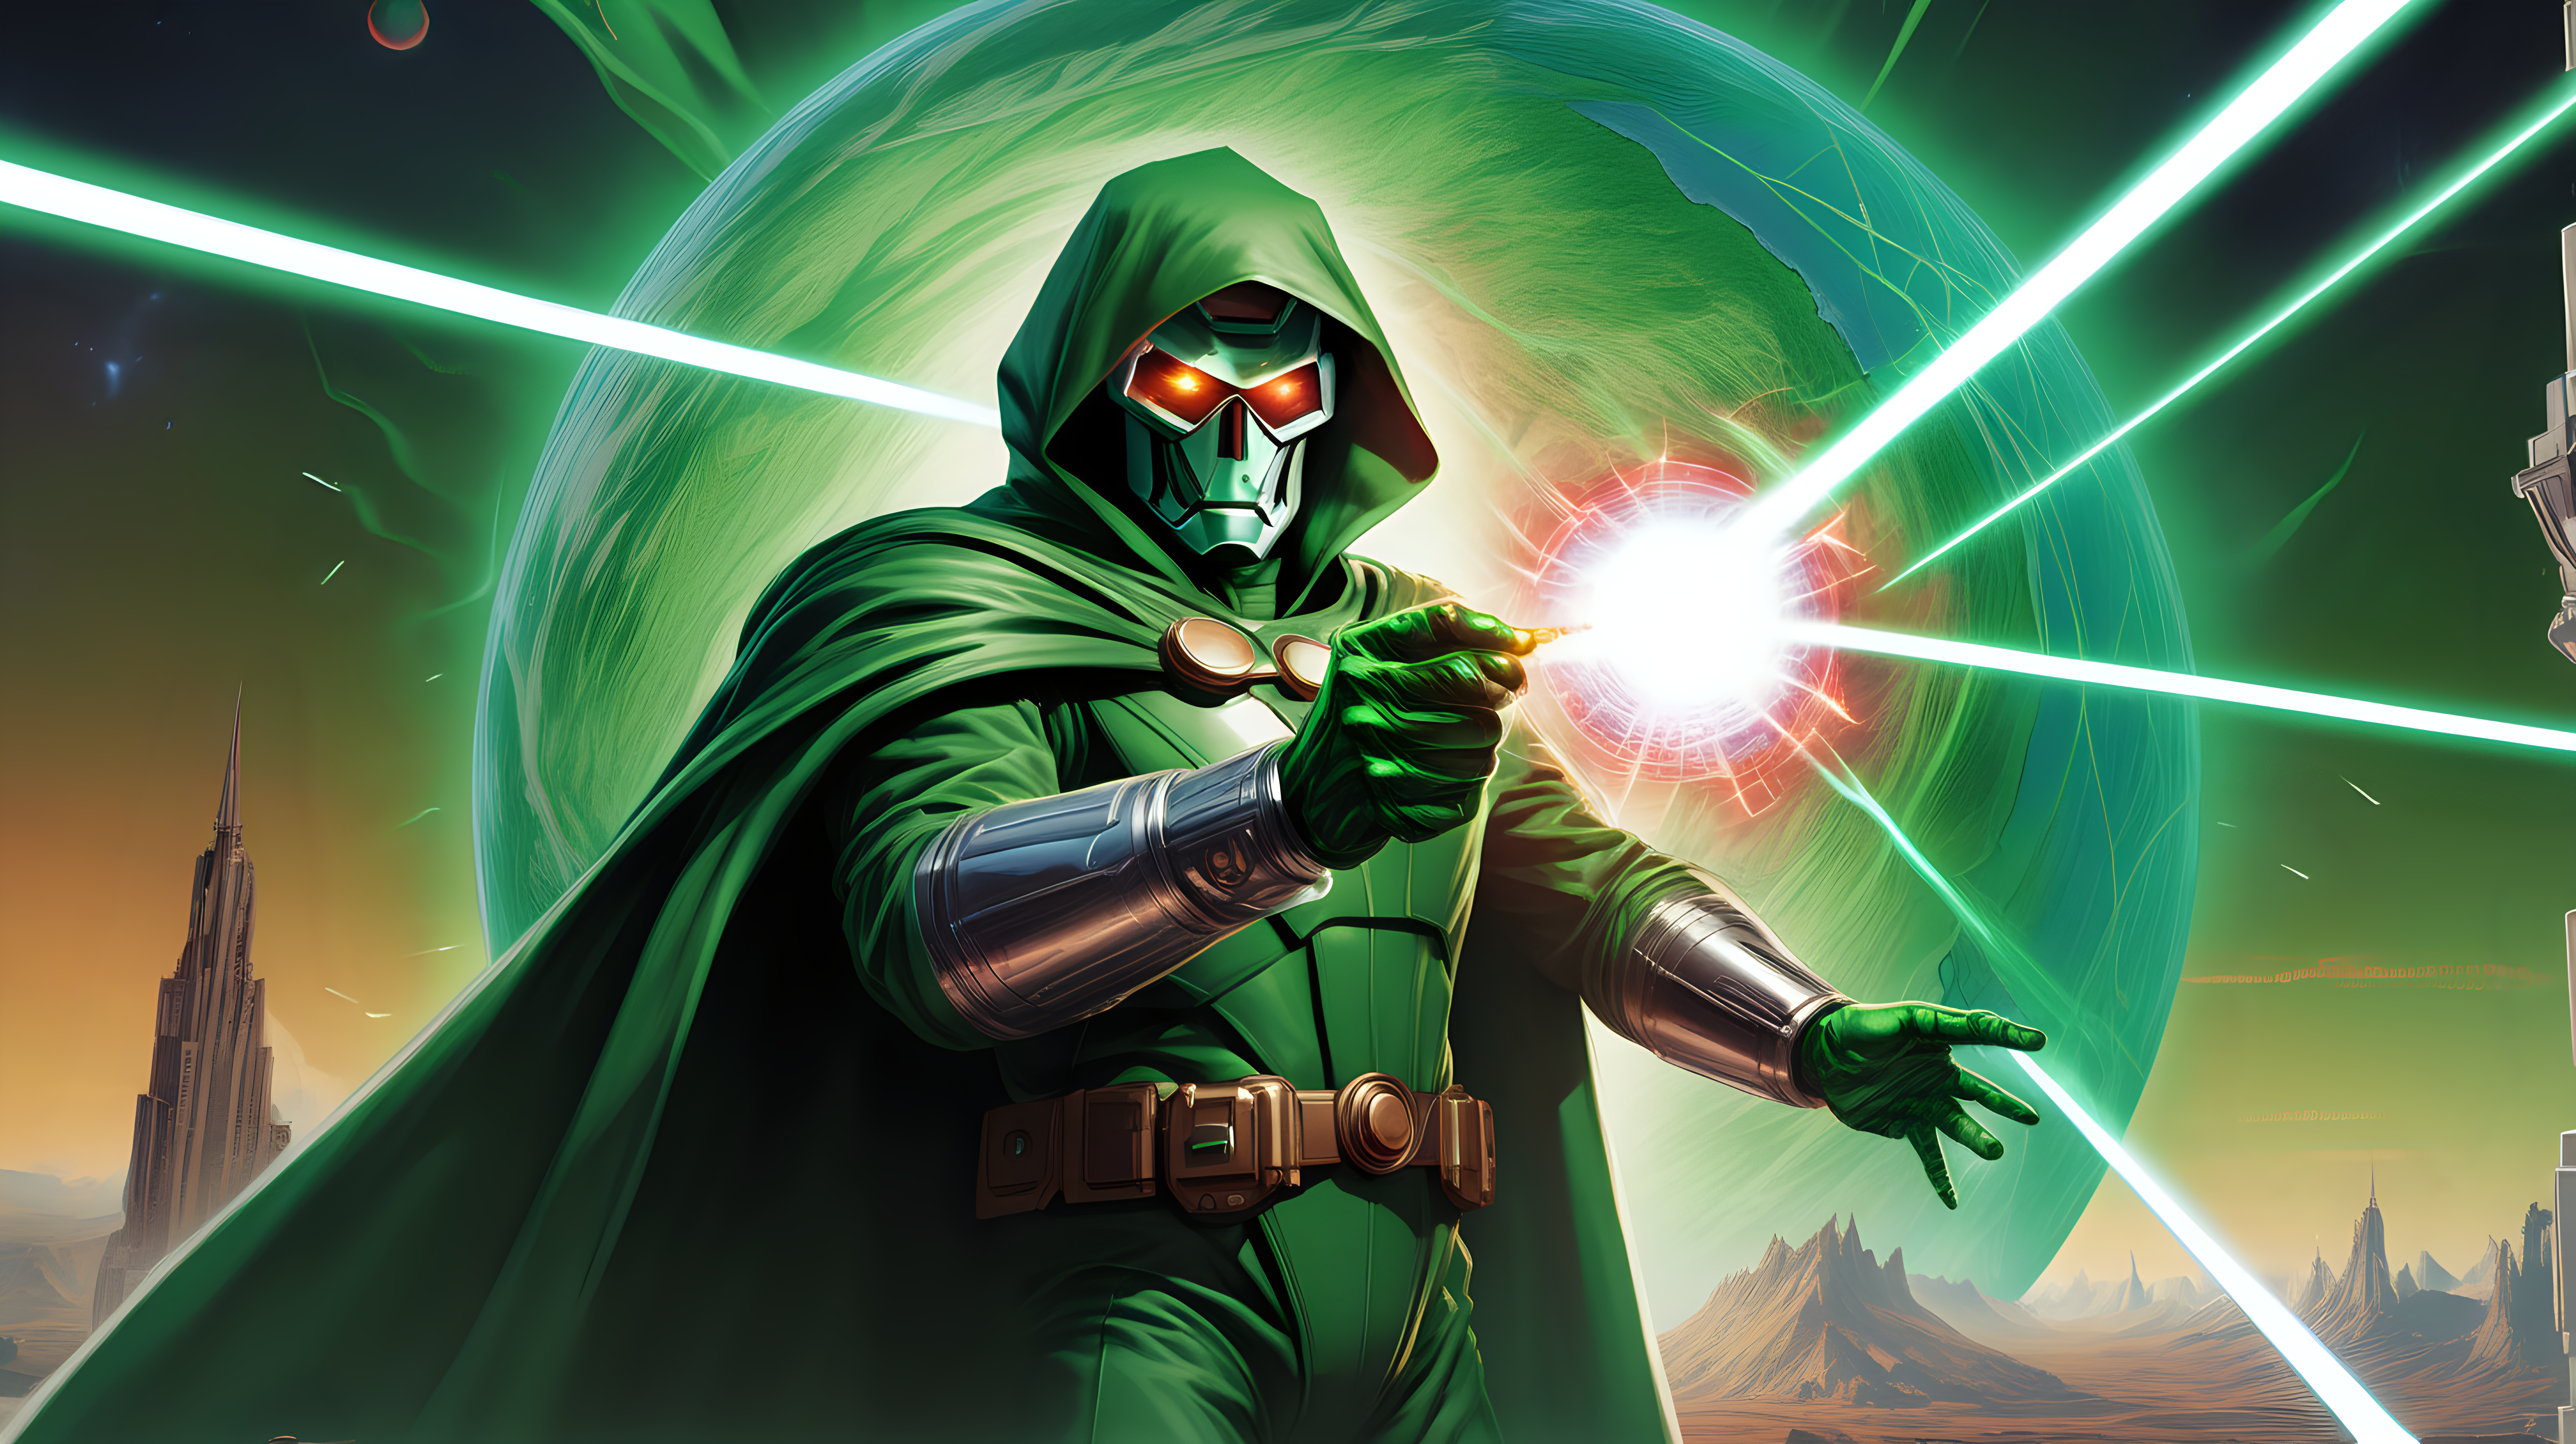 Doctor Doomdestroying a planet with lasers shooting from